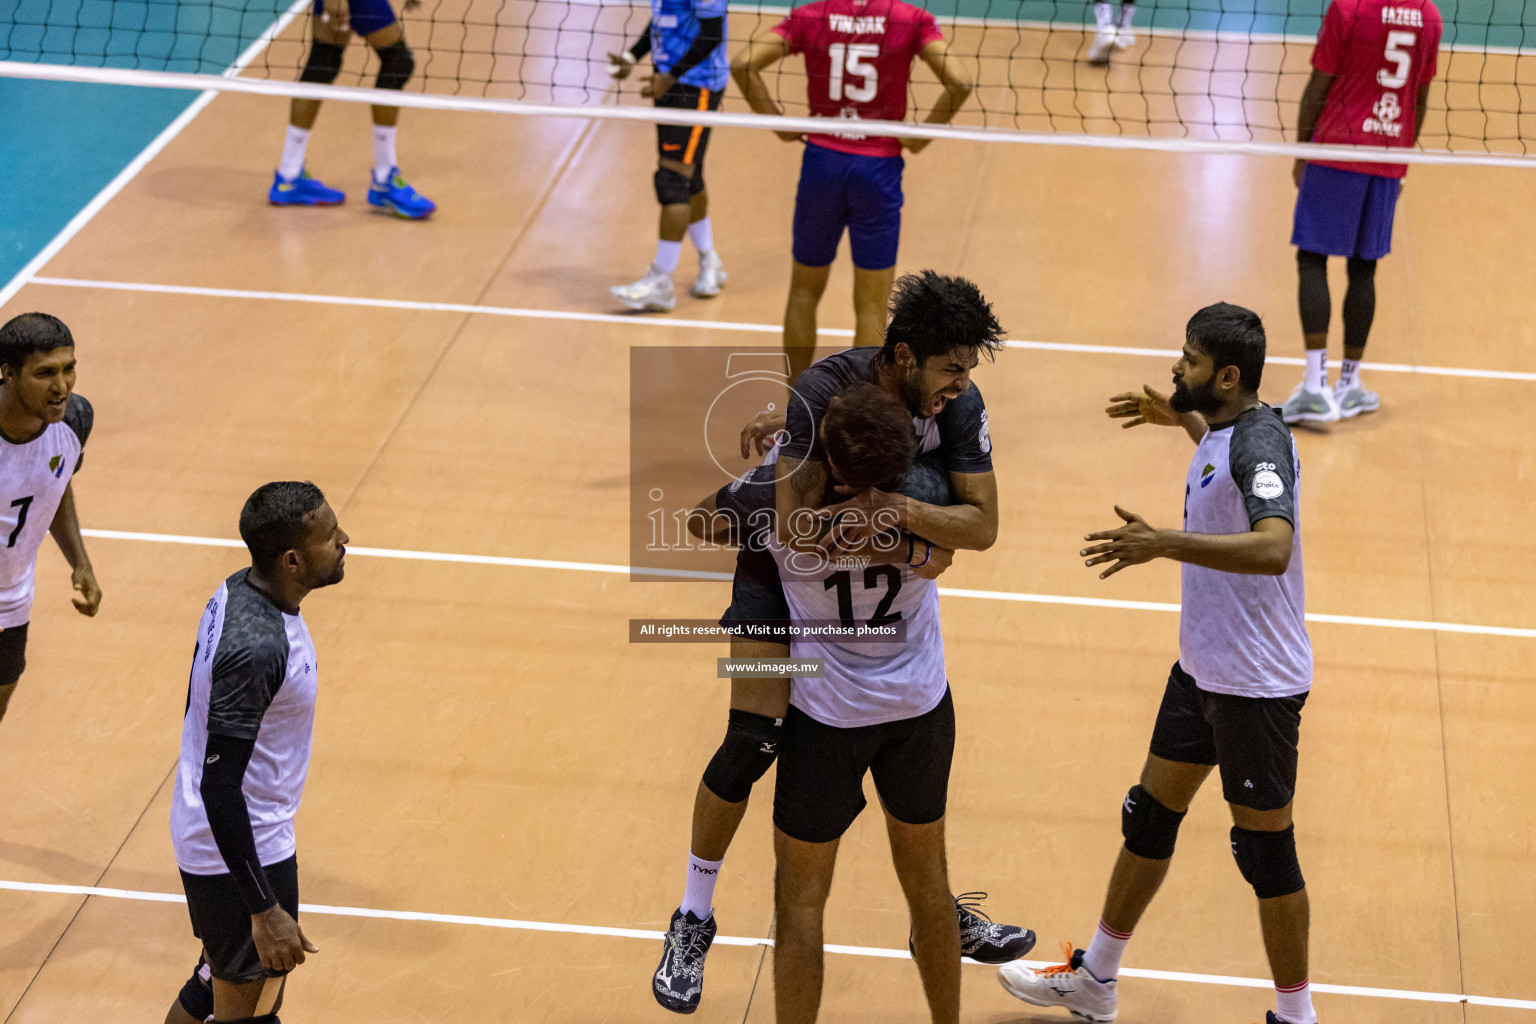 Sports Club City vs Dhivehi Sifainge Club in the Finals of National Volleyball Tournament 2022 on Thursday, 07th July 2022, held in Social Center, Male', Maldives